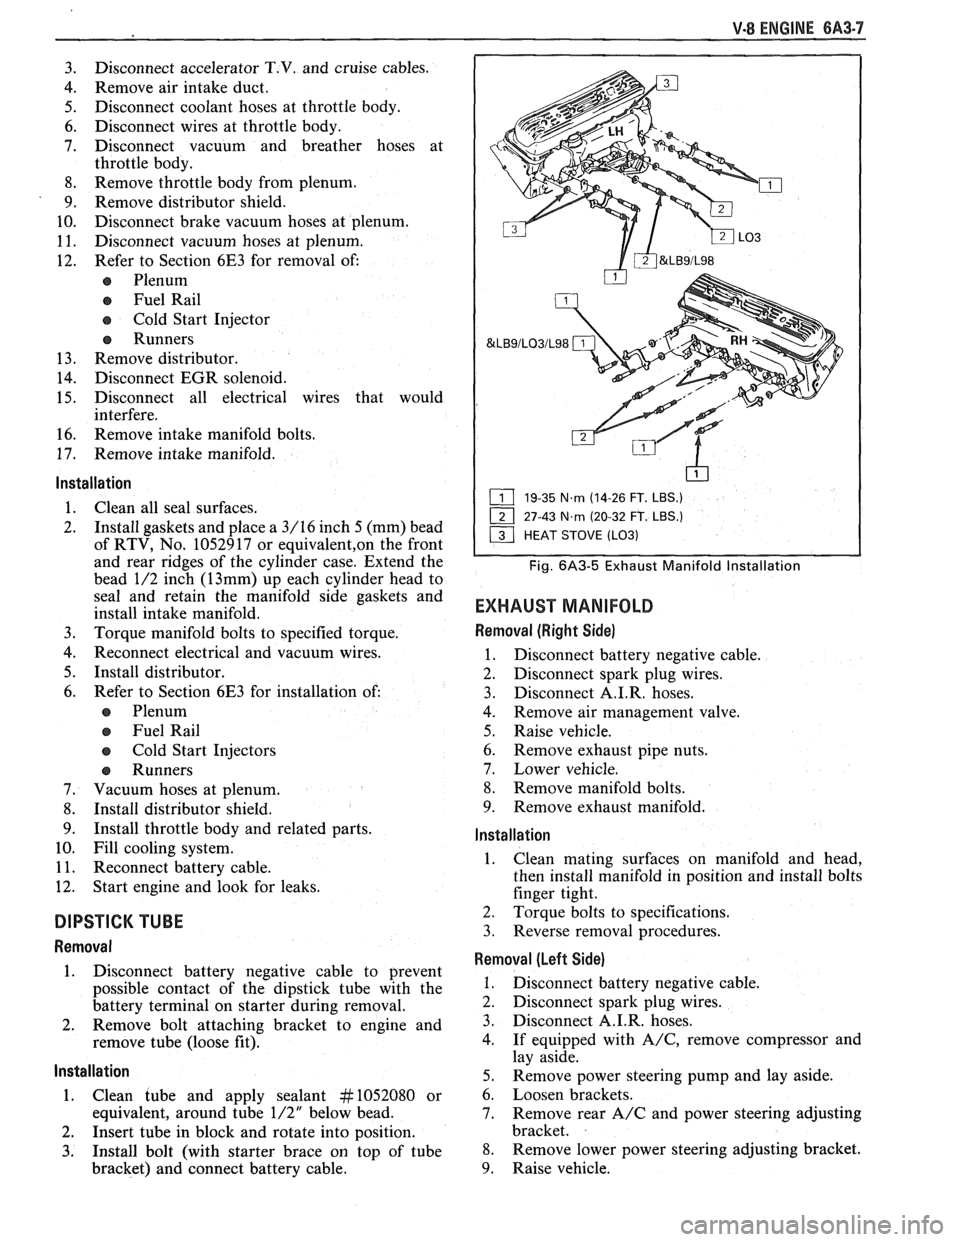 PONTIAC FIERO 1988  Service User Guide 
V-8 ENGINE 6A3-7 
- 
3. Disconnect accelerator T.V. and  cruise  cables. 
4.  Remove  air  intake  duct. 
5. Disconnect coolant  hoses at throttle  body. 
6.  Disconnect  wires at throttle  body. 
7.